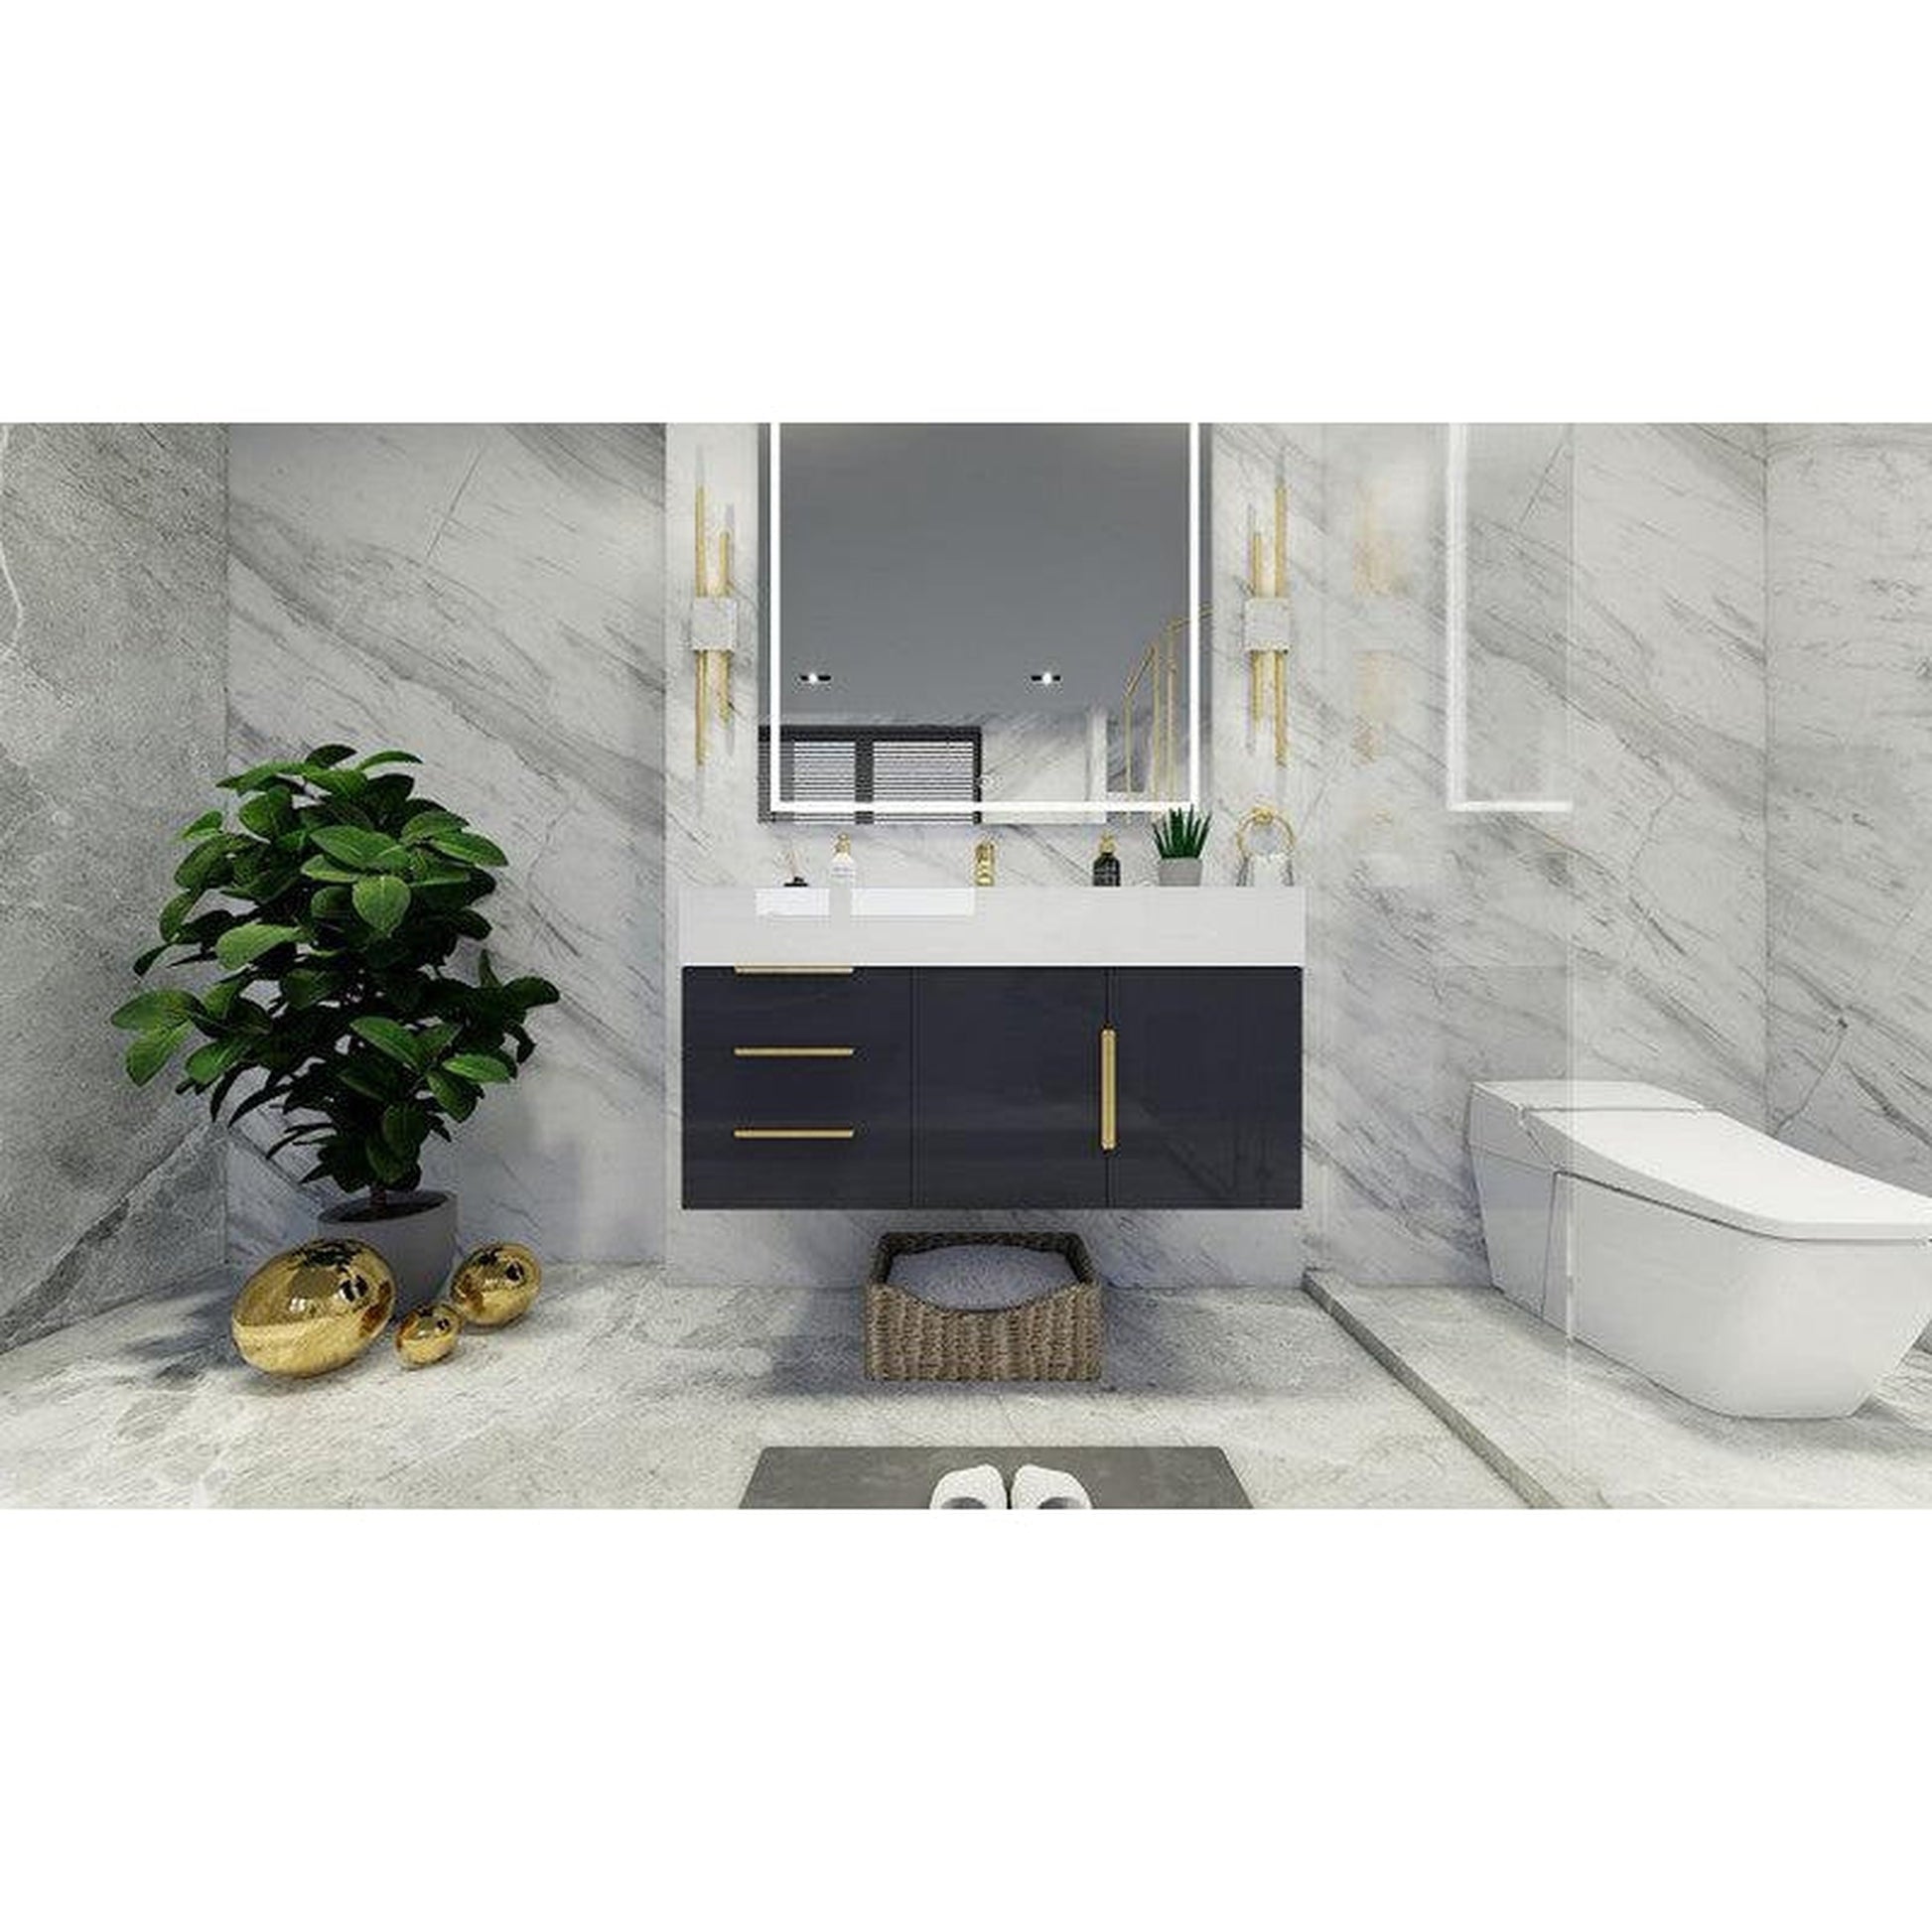 Moreno Bath Bethany 42" High Gloss Gray Wall-Mounted Vanity With Left Side Drawers and Single Reinforced White Acrylic Sink